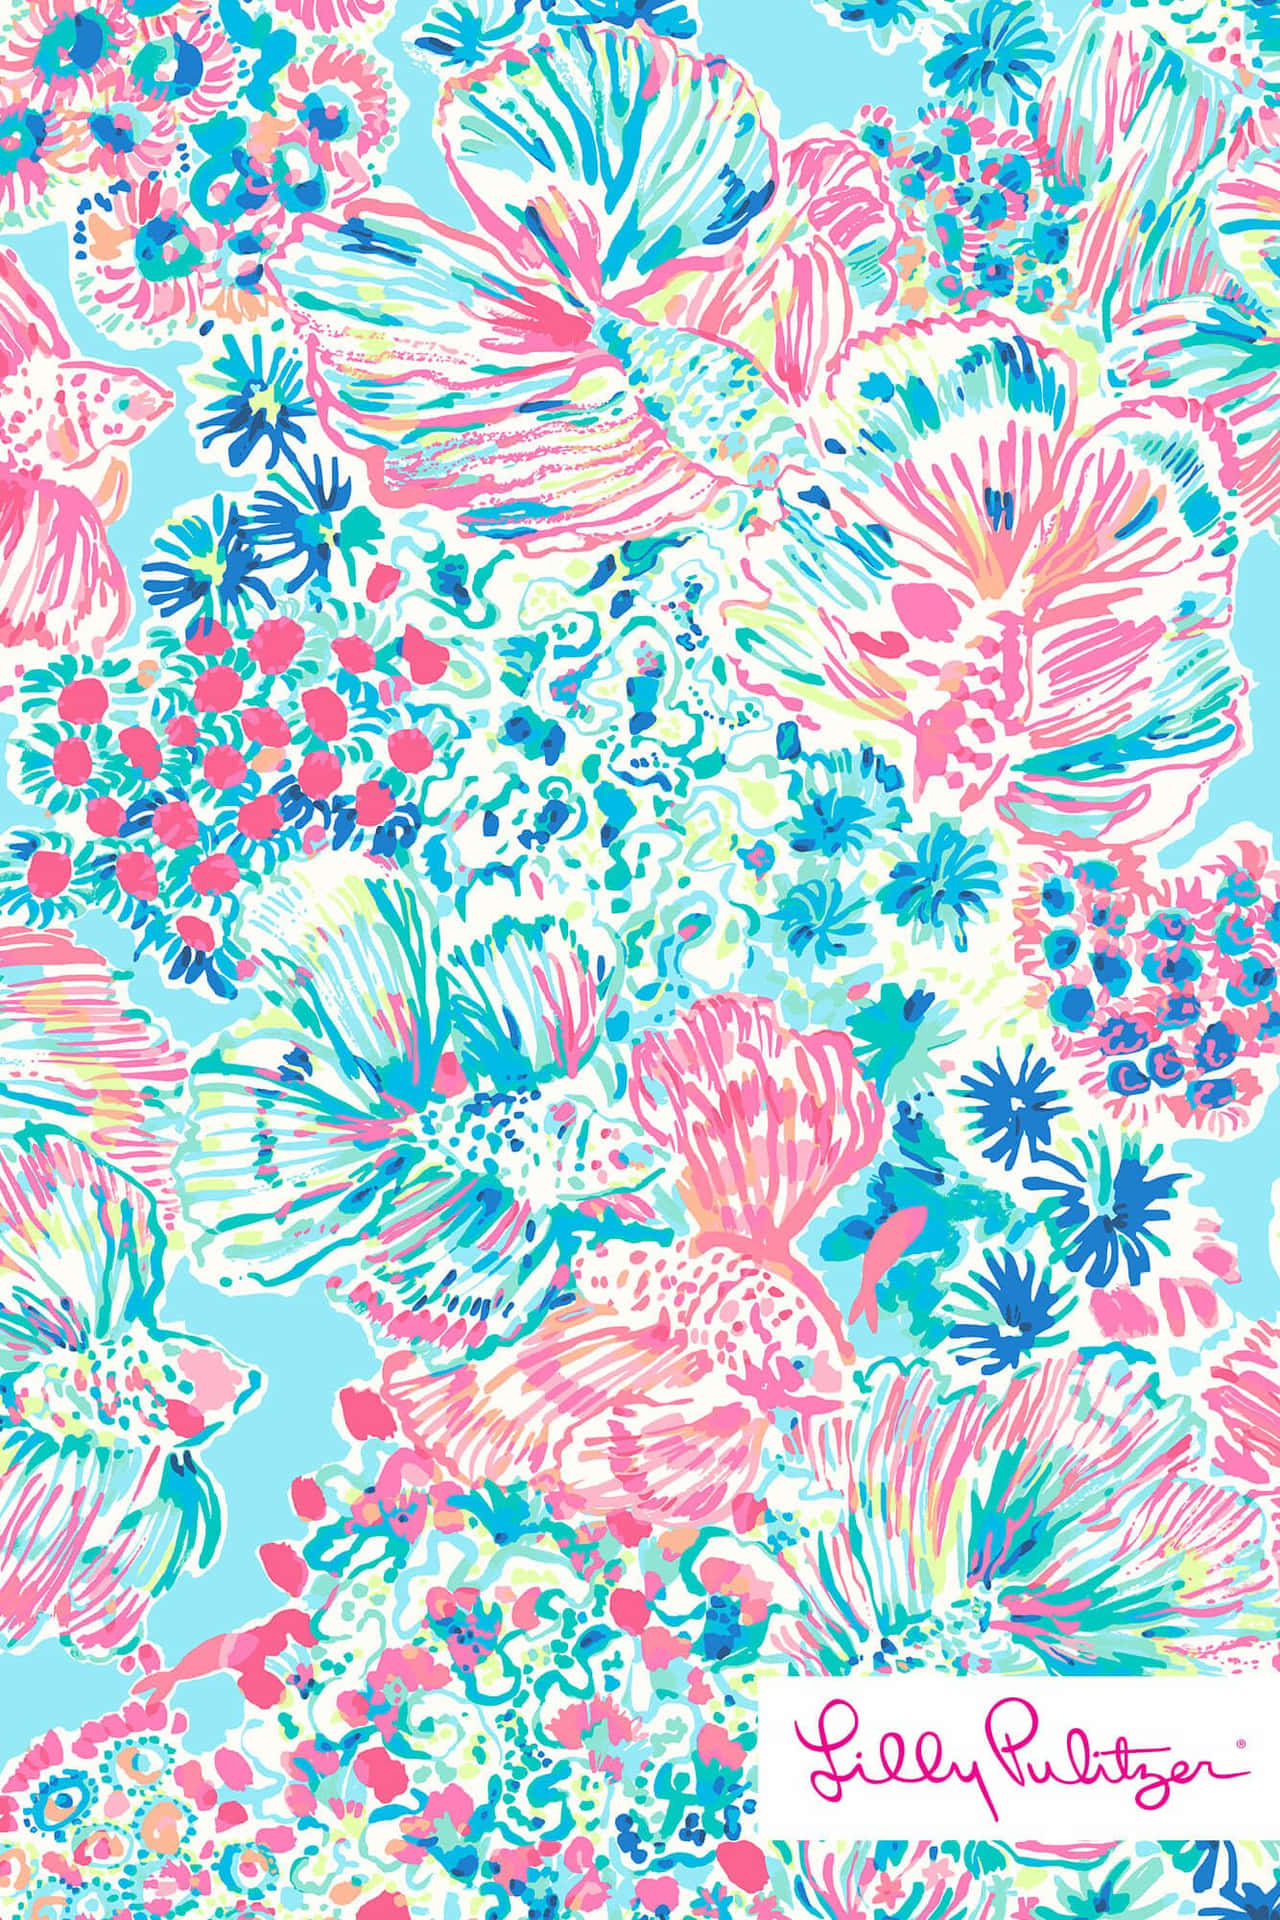 A bright, luxurious summer day with Lilly Pulitzer